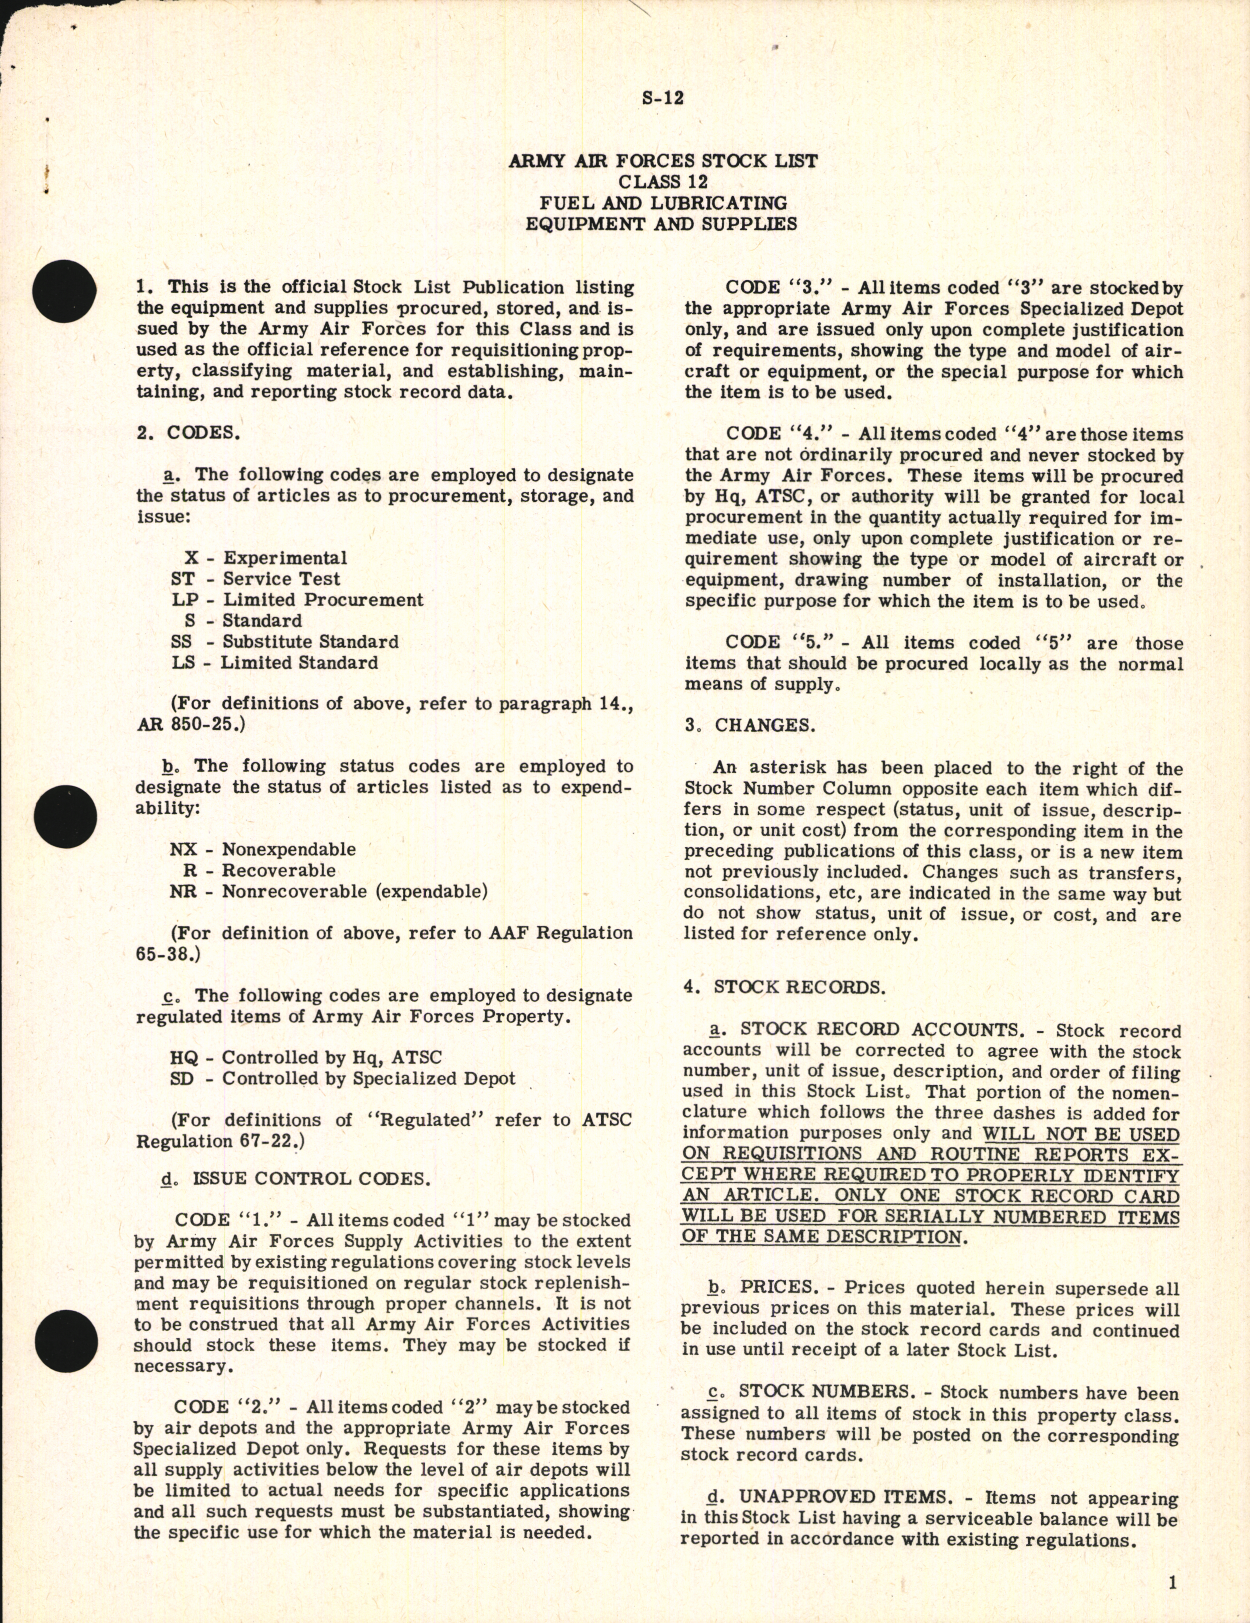 Sample page 3 from AirCorps Library document: Stock List Fuel and Lubricating Equipment and Supplies